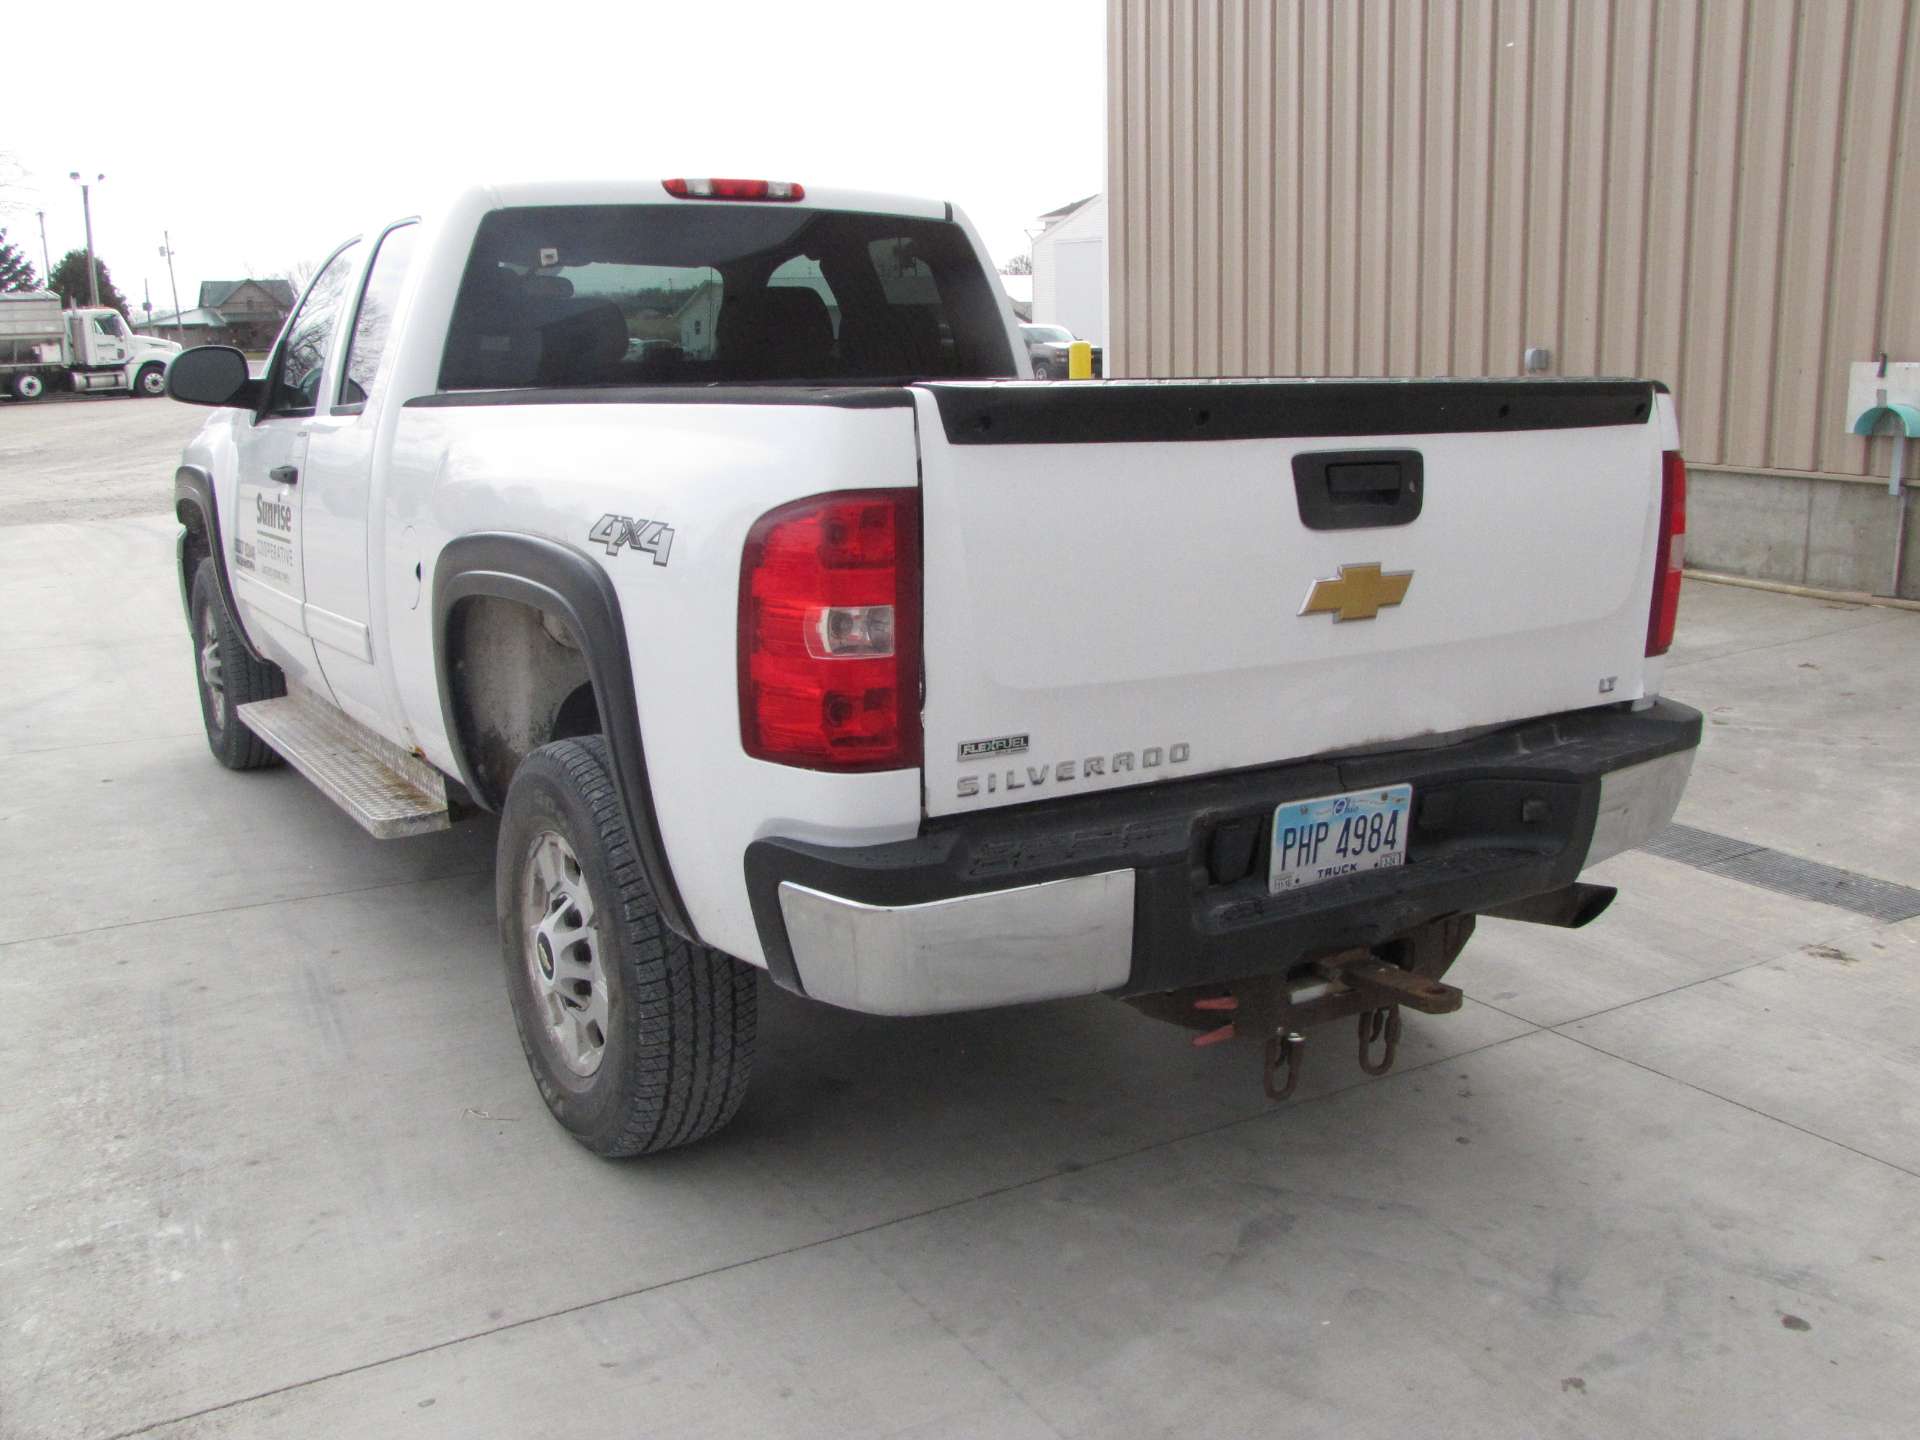 2012 Chevy 2500 HD pickup truck - Image 7 of 57